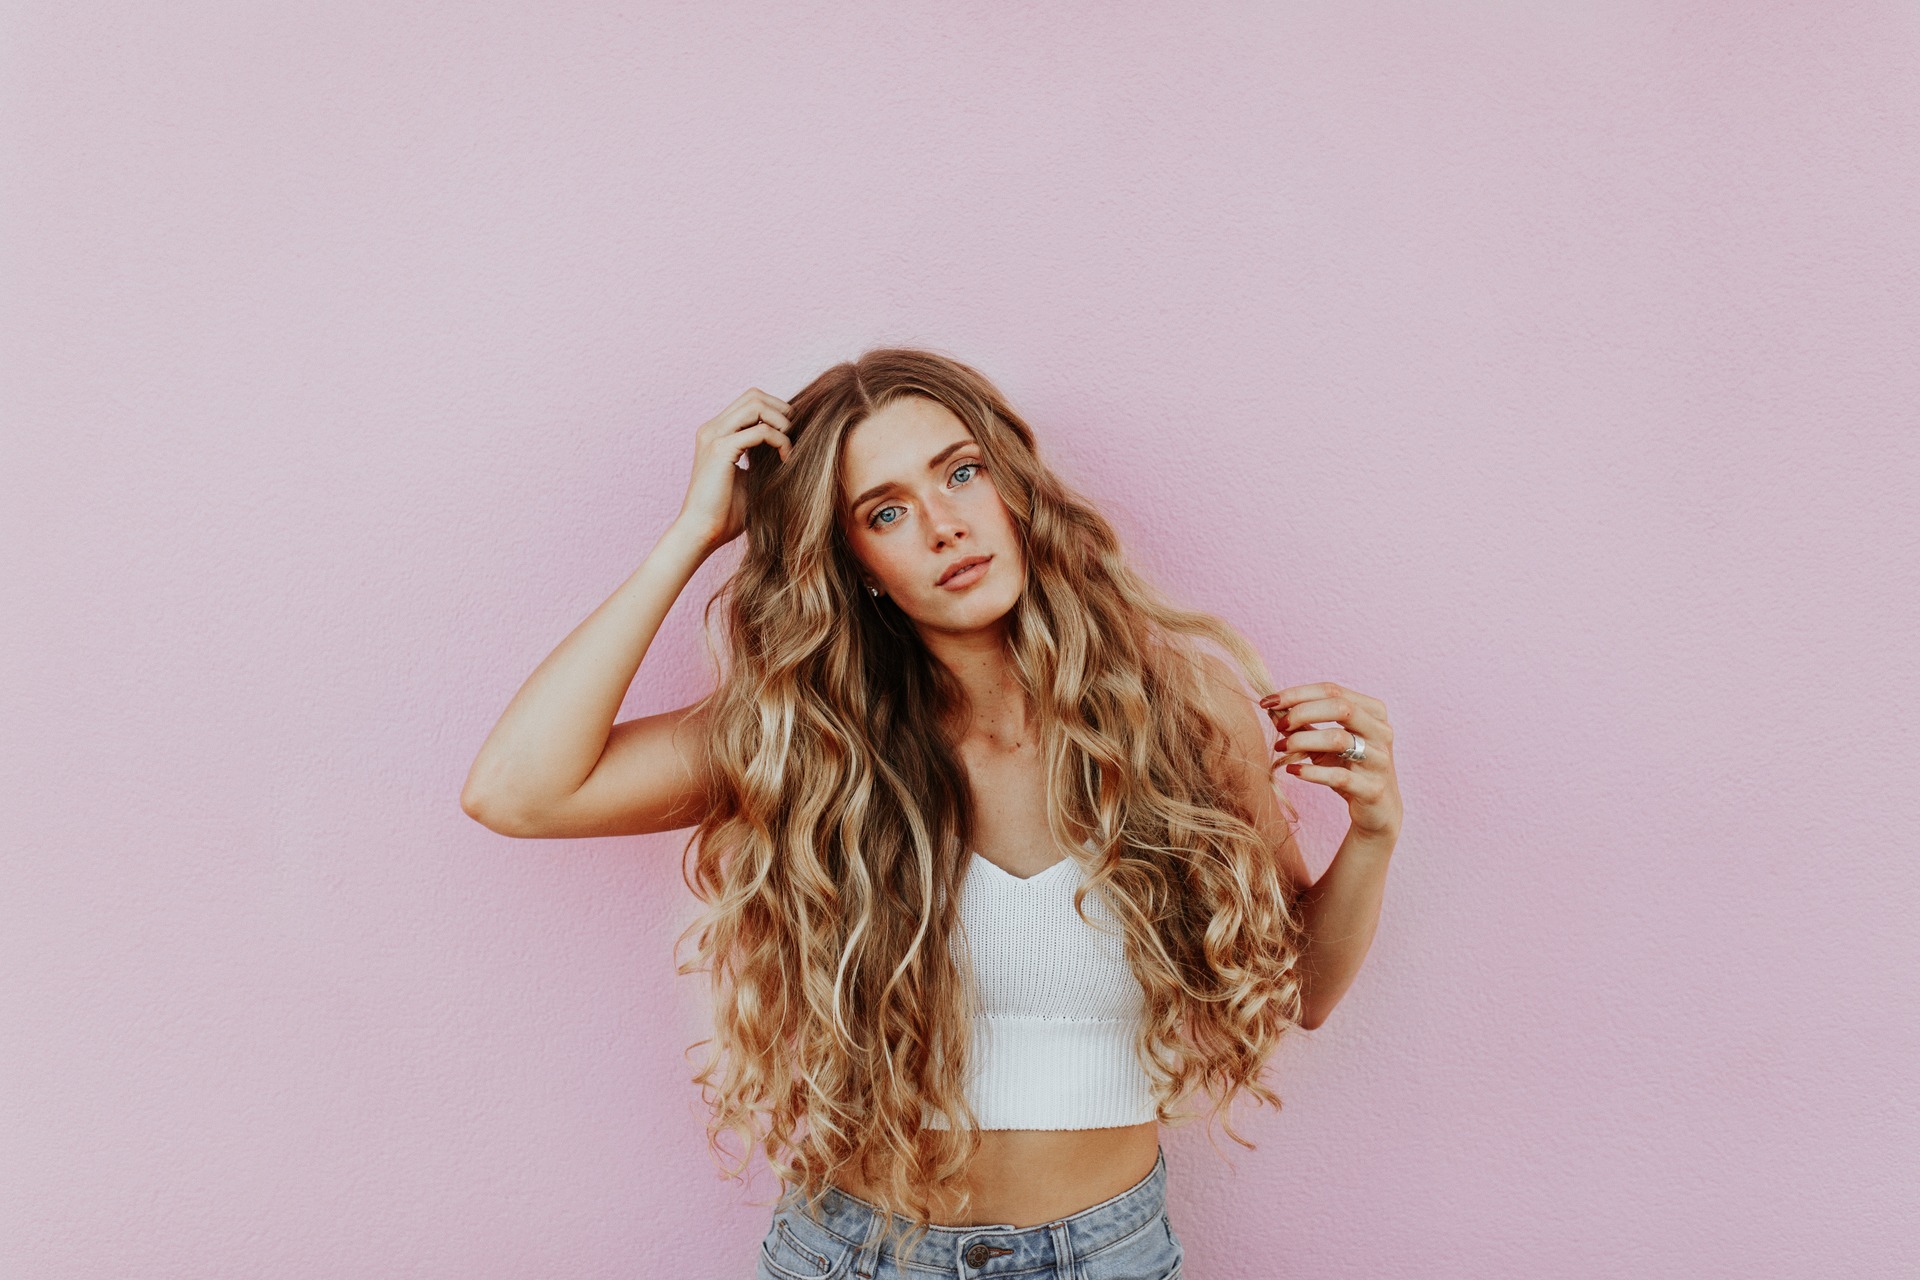 A white woman with long, wavy blonde hair stands against a pink wall